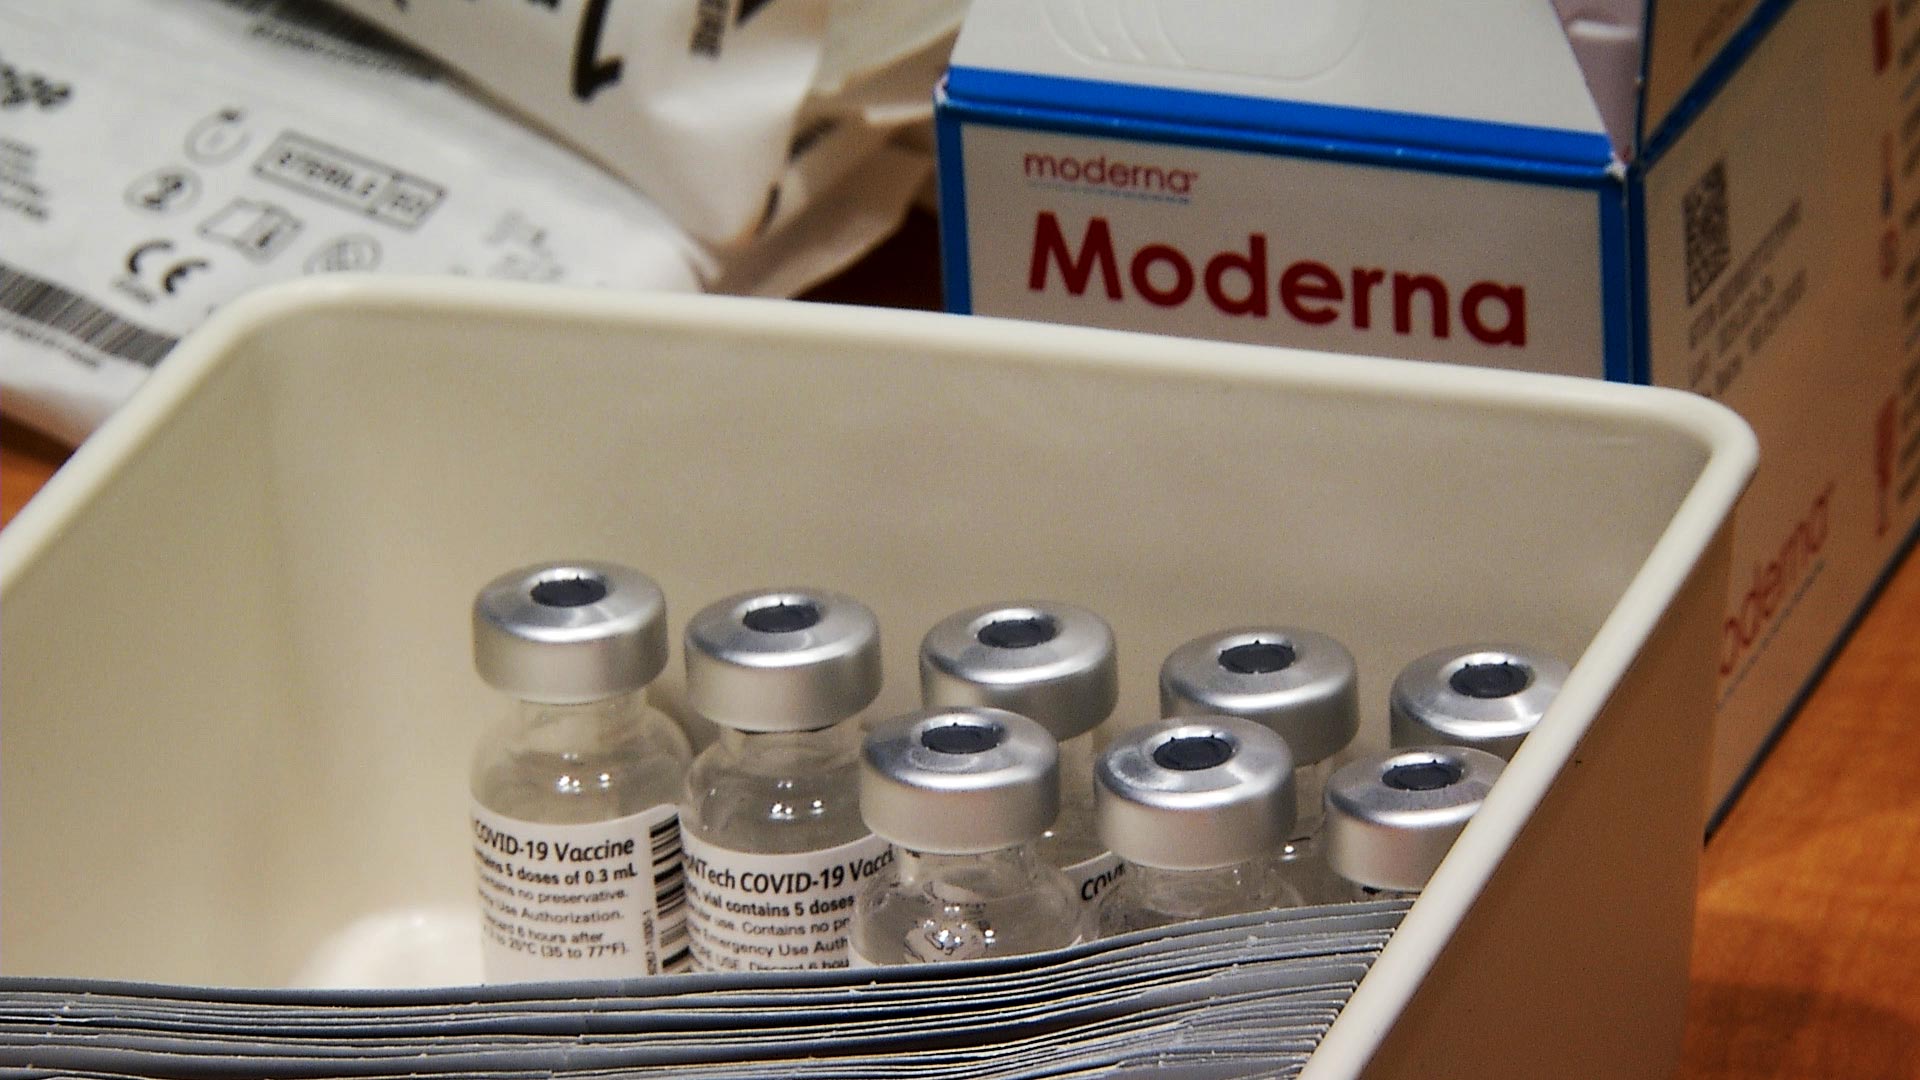 A container holds several vials of Moderna's COVID-19 vaccine at a distribution event at Tucson Medical Center on Jan. 15, 2021. 